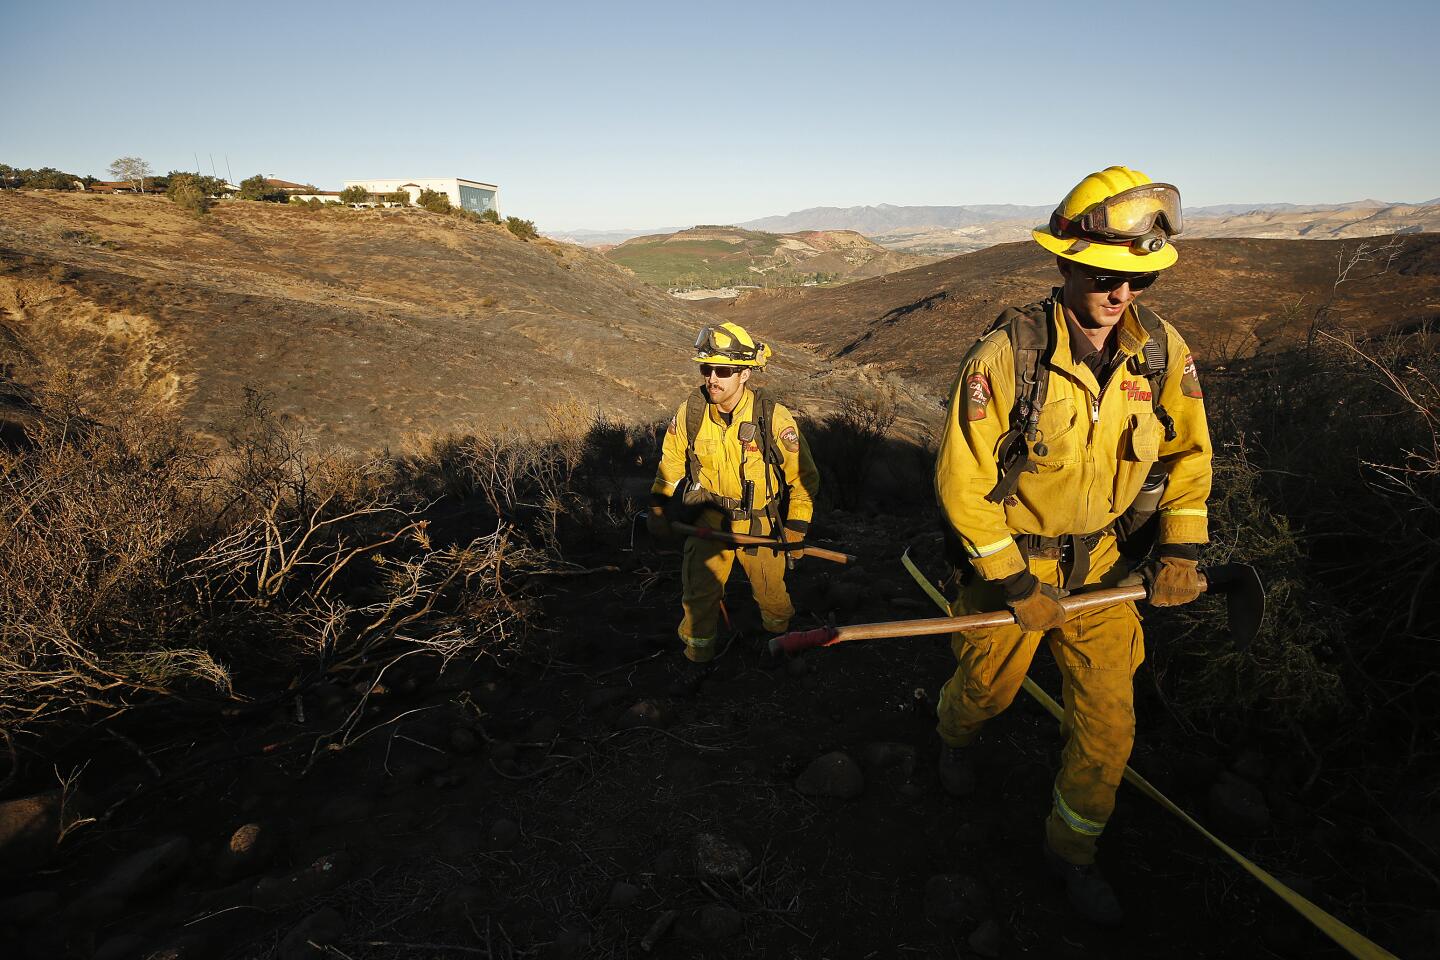 Firefighters Iann Miller, left and Austin Houck, right, from Cal Fire Tuolumne-Calaveras Unit on patrol and mop up of the Easy Fire around the Ronald Reagan Library in Simi Valley.